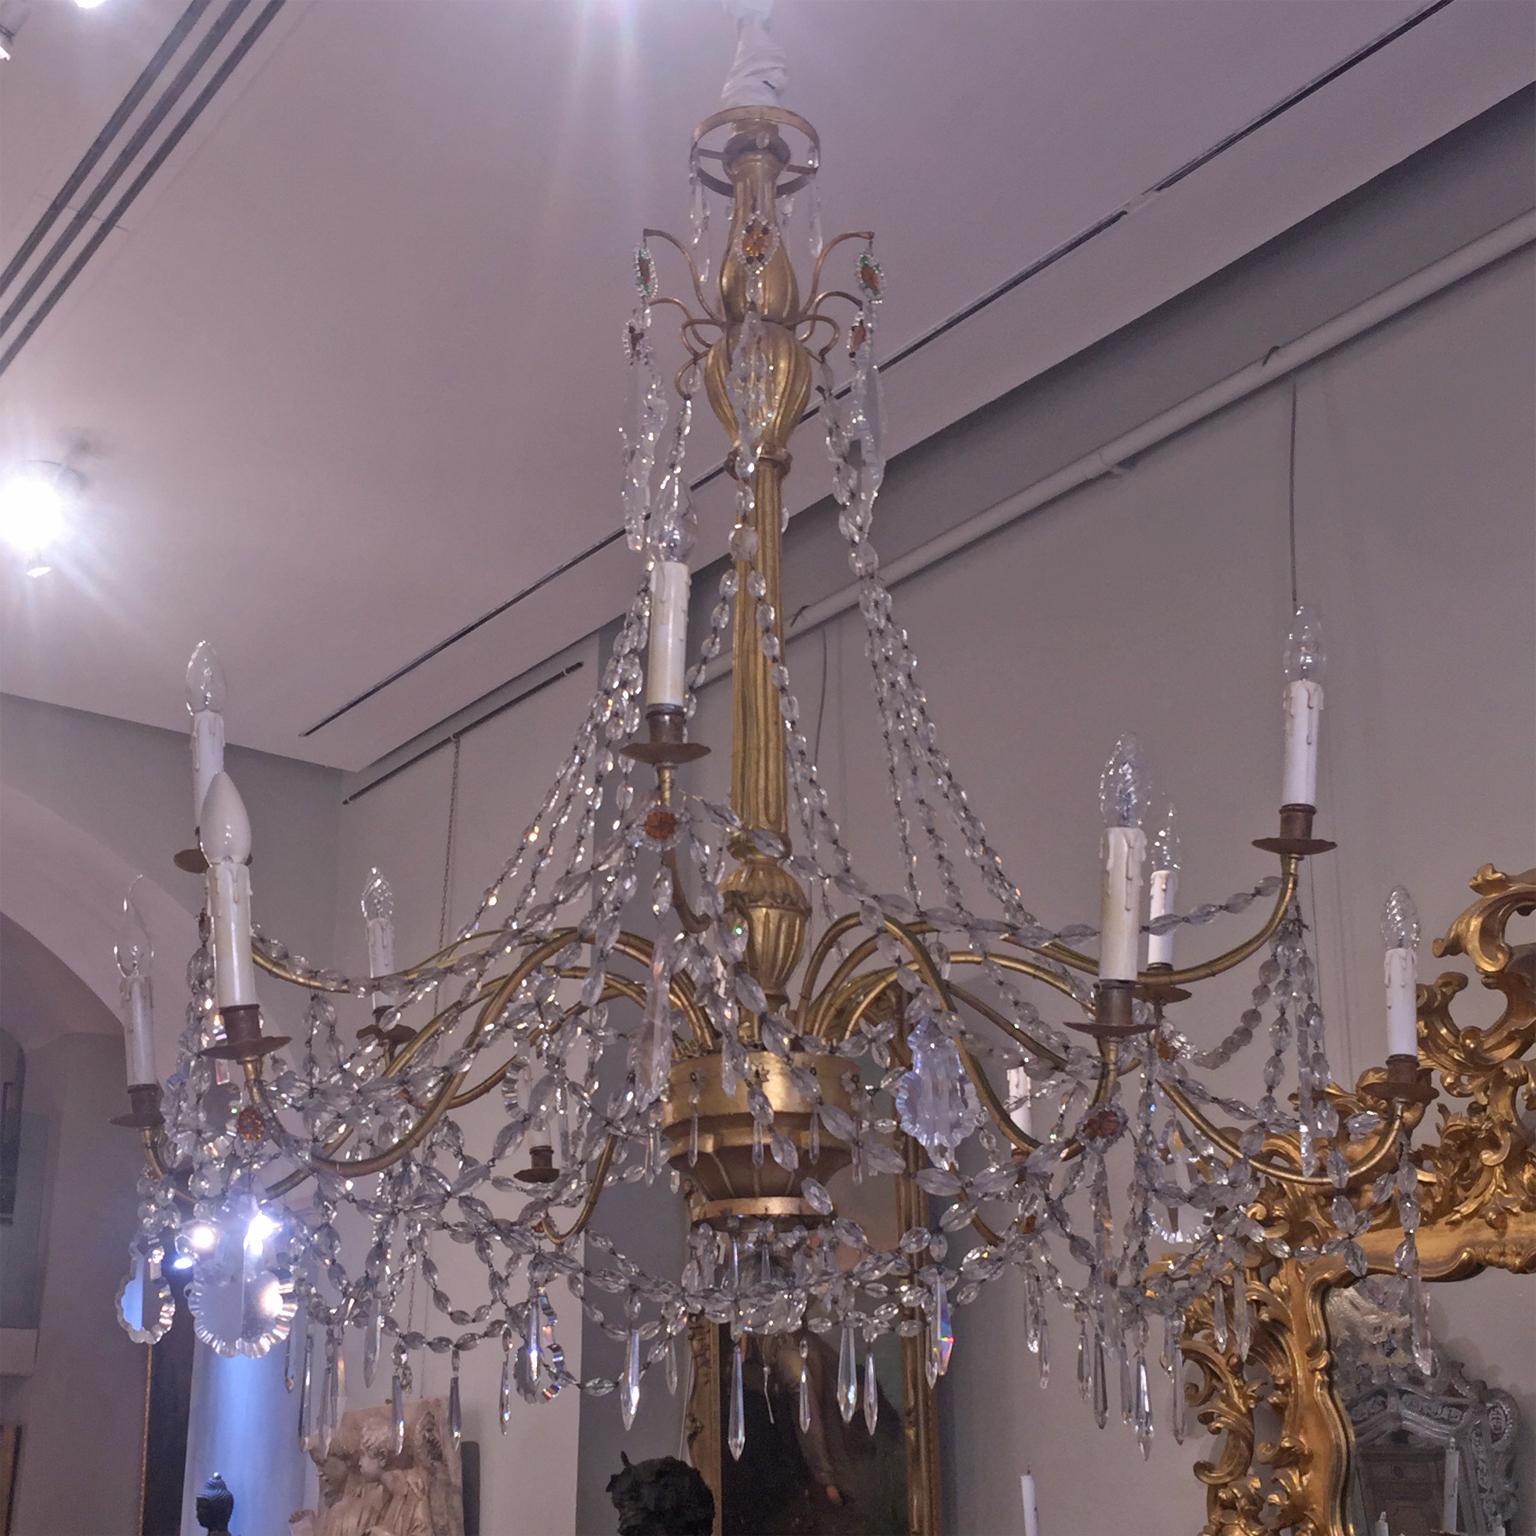 Beautiful Italian chandelier with a central upright in carved wood and gilded with pure gold leaf, with 12 golden wrought iron arms. Finished with ground pendants. Genovese Manufactory of the end of the 18th century. This chandelier is one of a